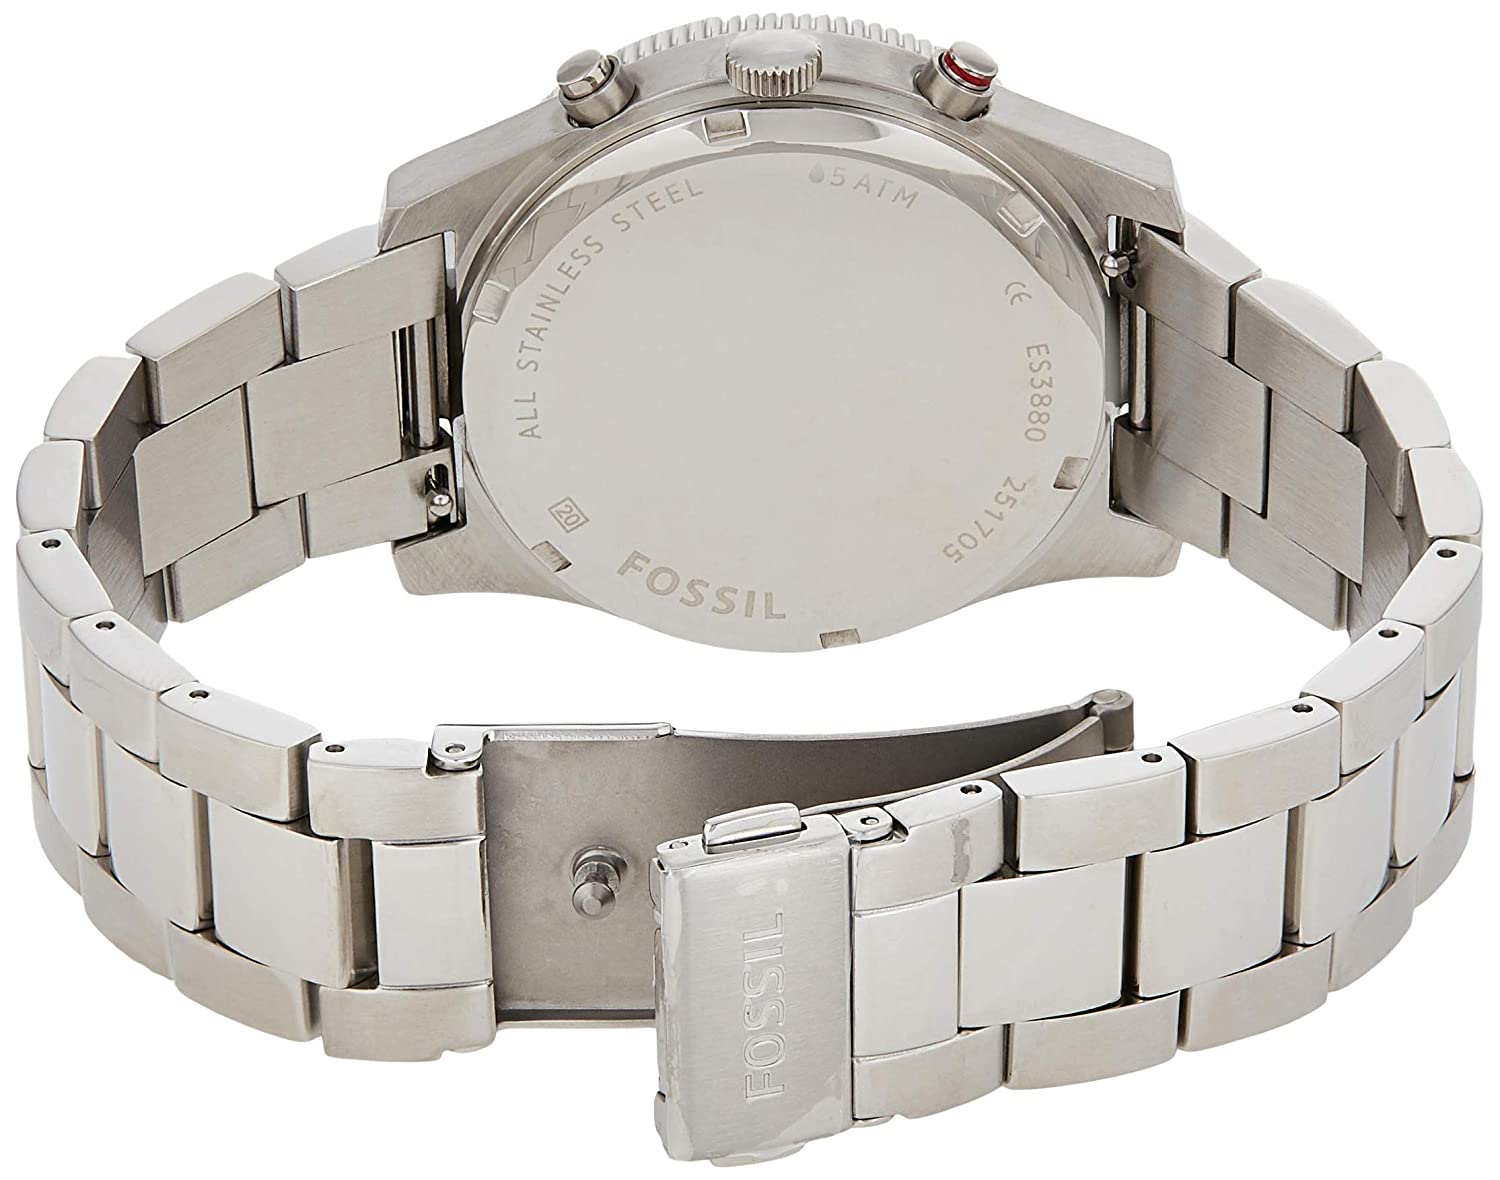 Fossil Perfect Boyfriend Blue Mother of Pearl Dial Silver Steel Strap Watch for Women - ES3880